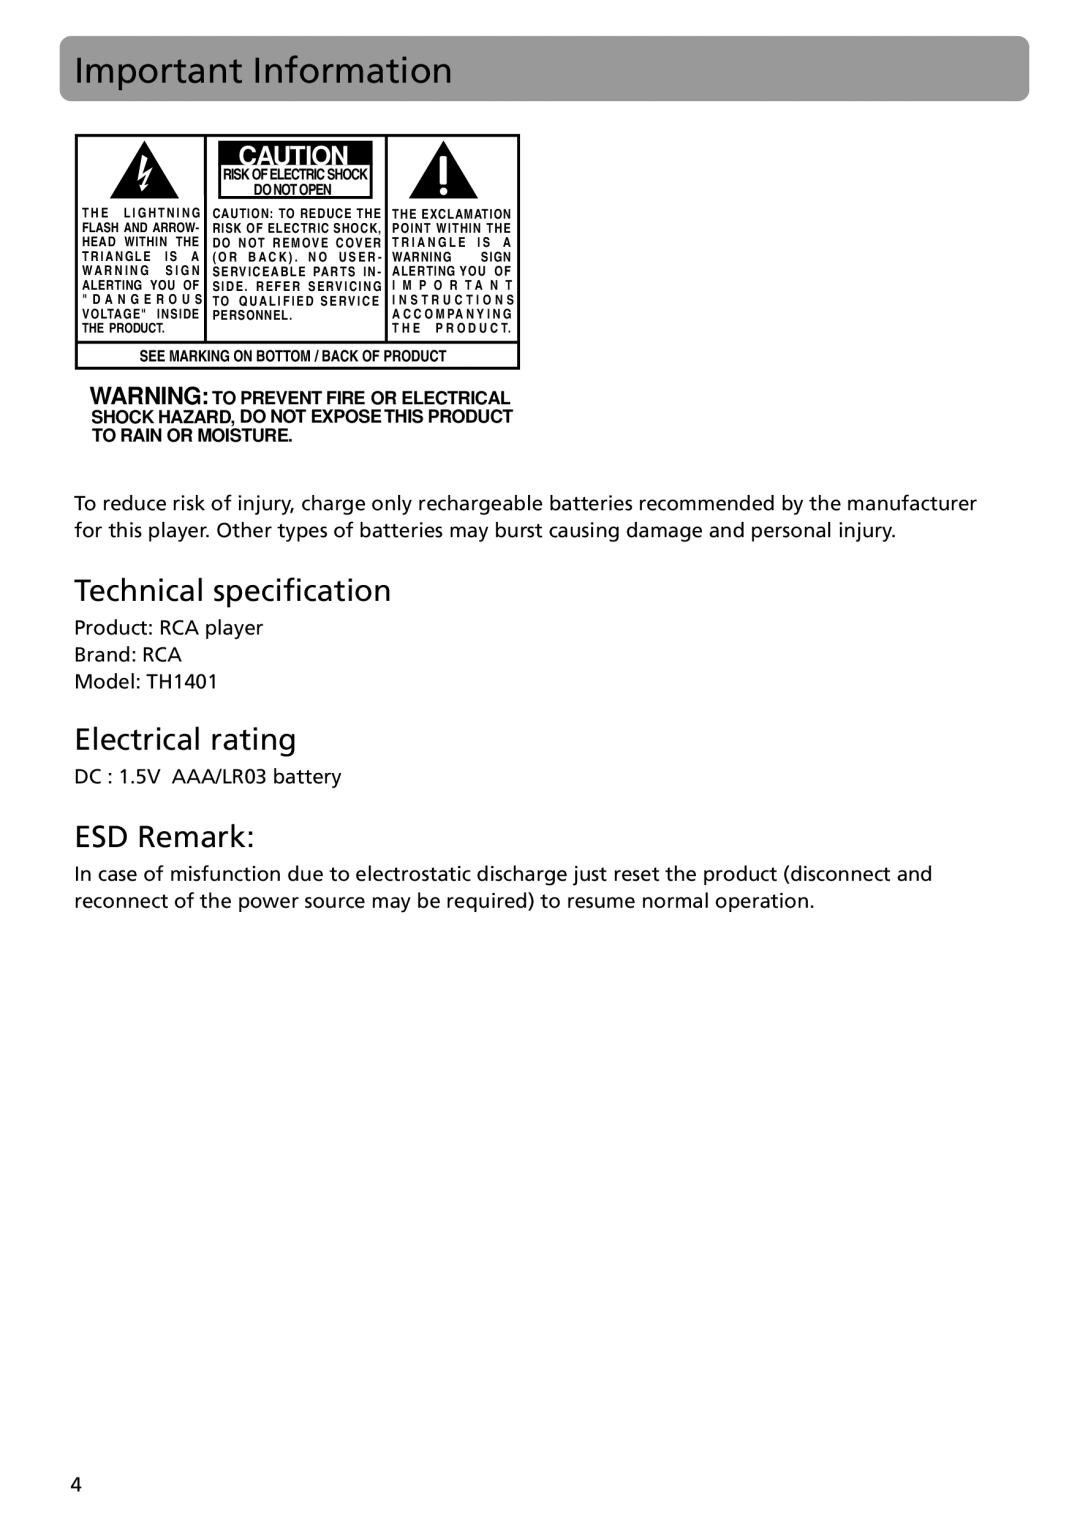 RCA TH1401 user manual Important Information, Technical specification, Electrical rating, ESD Remark 